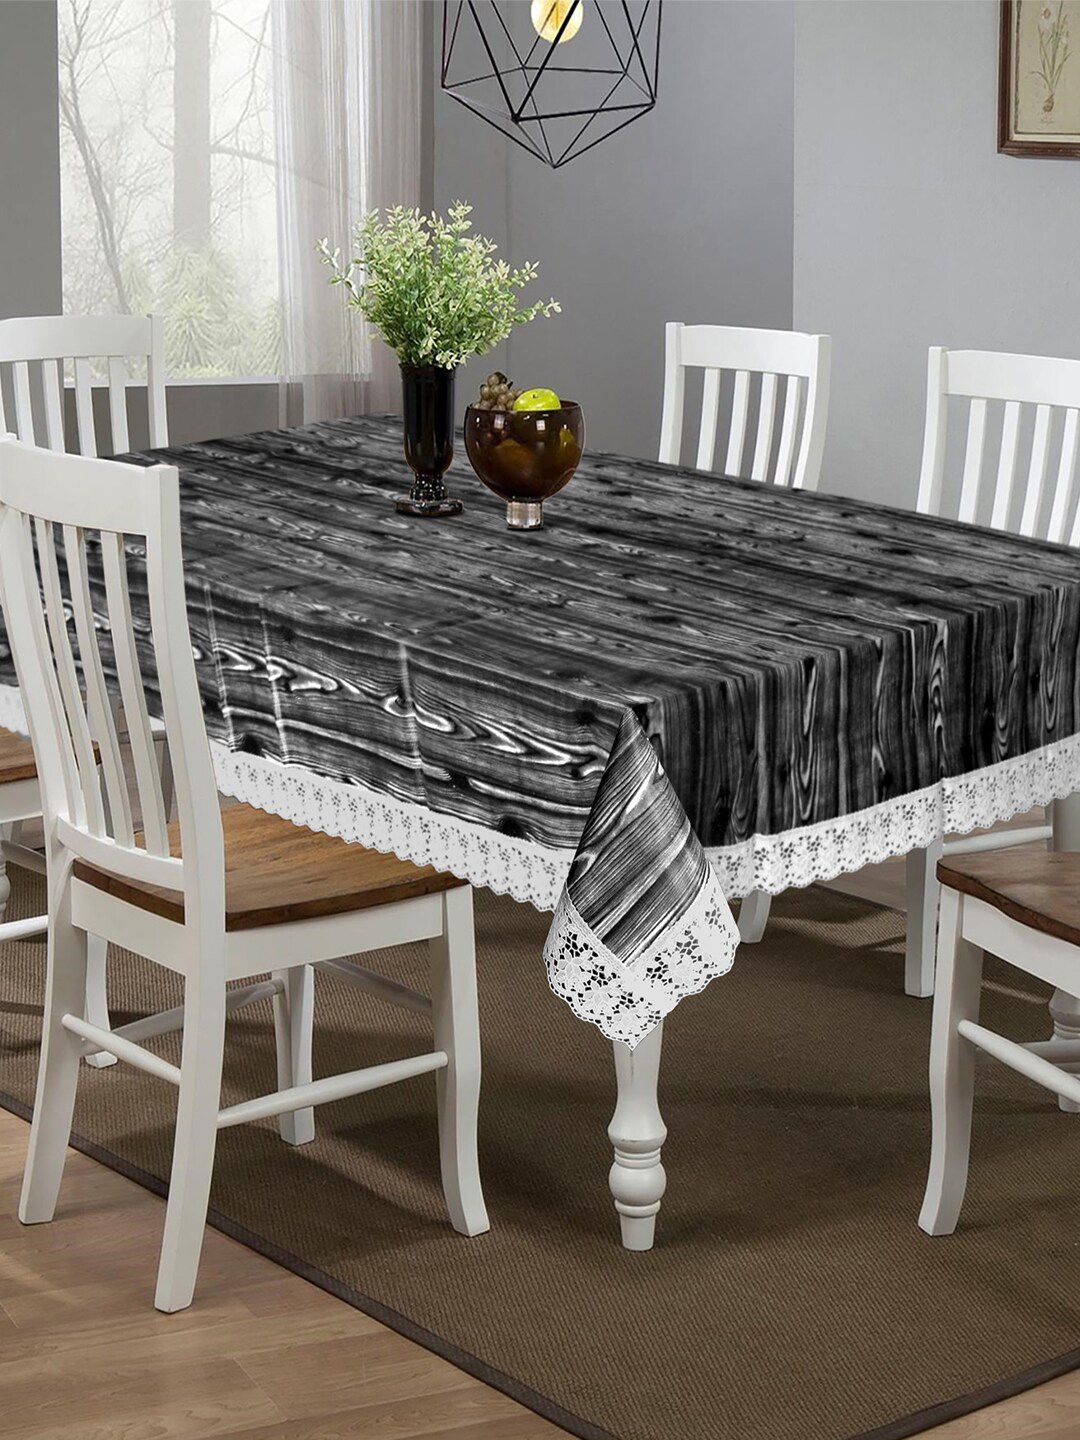 Kuber Industries Black & White Printed 6 Seater Table Cover Price in India